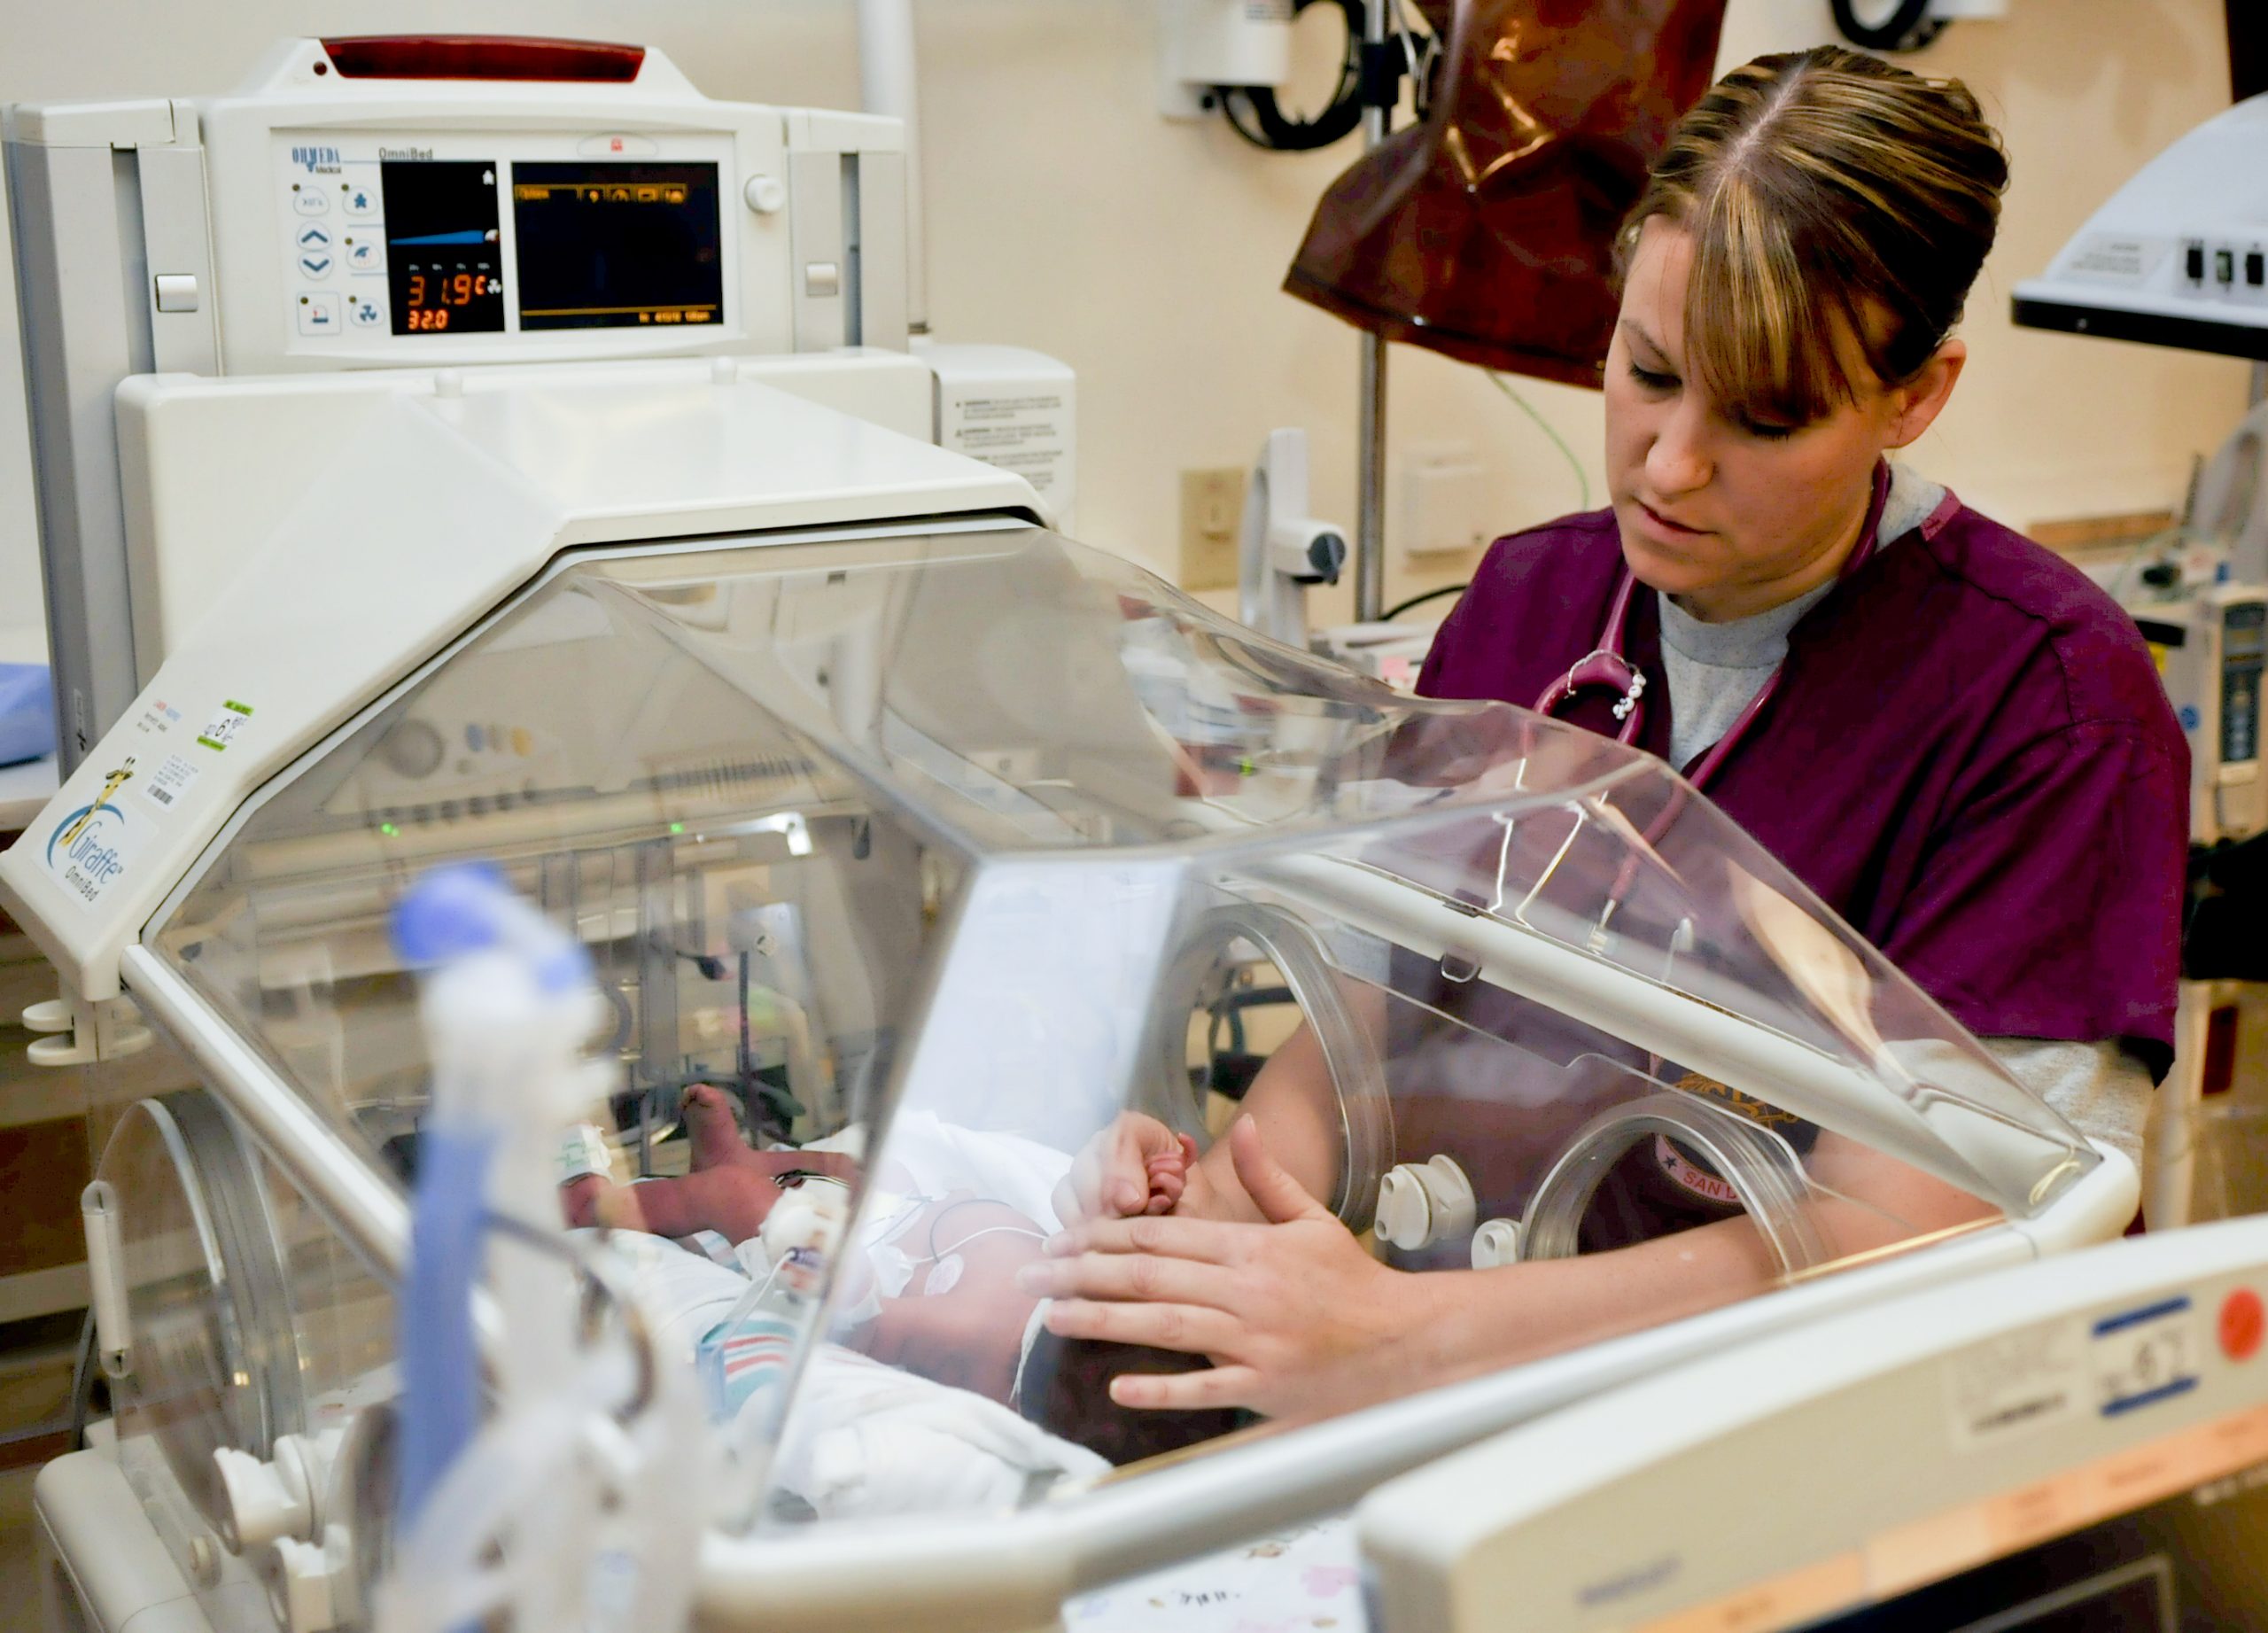 Photo showing nurse touching infant in incubator